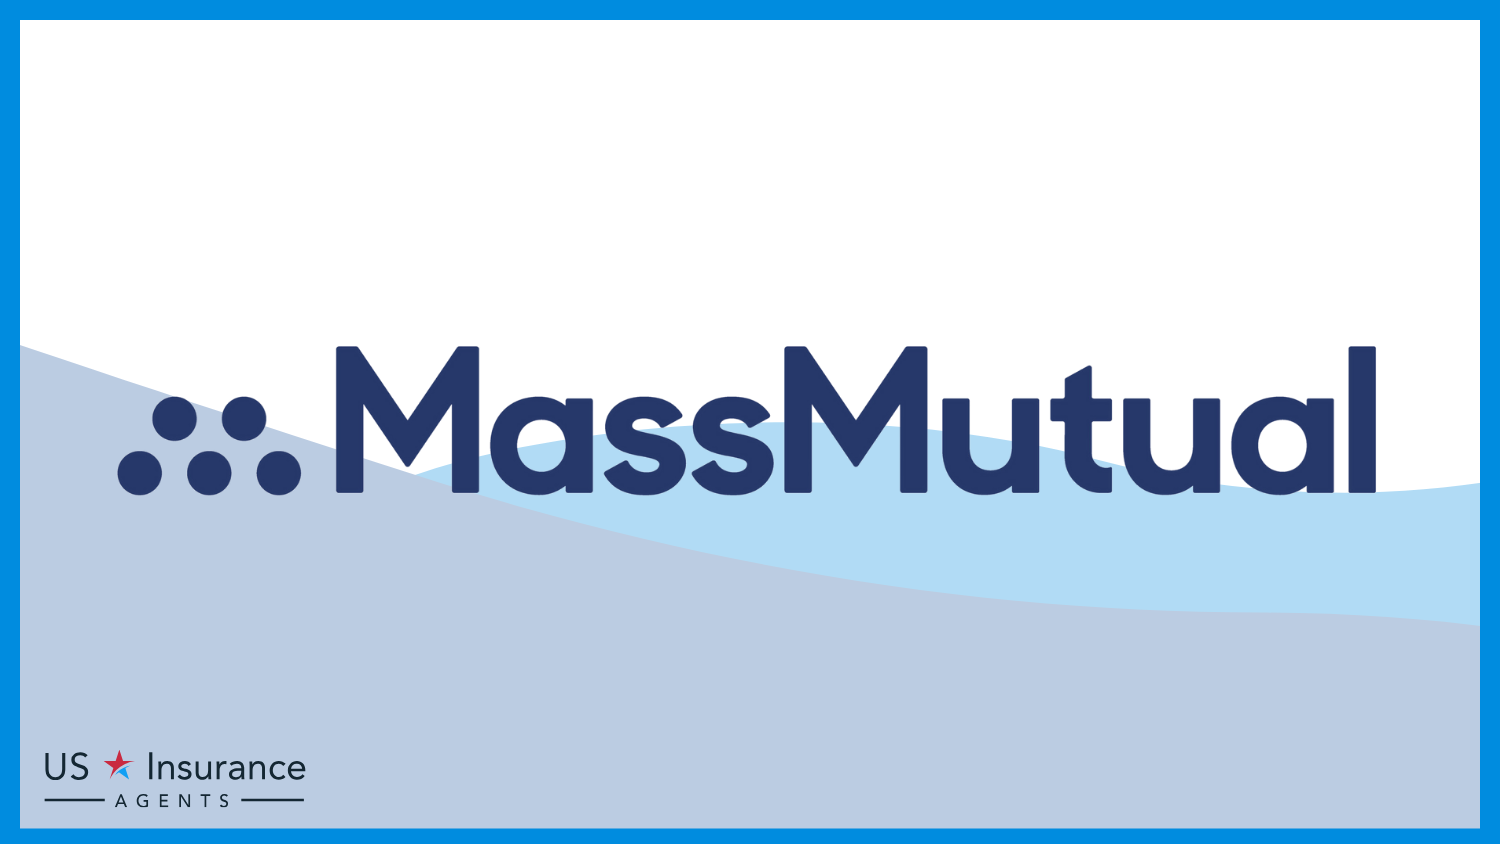 MassMutual: Best Life Insurance for High-Net-Worth Individuals